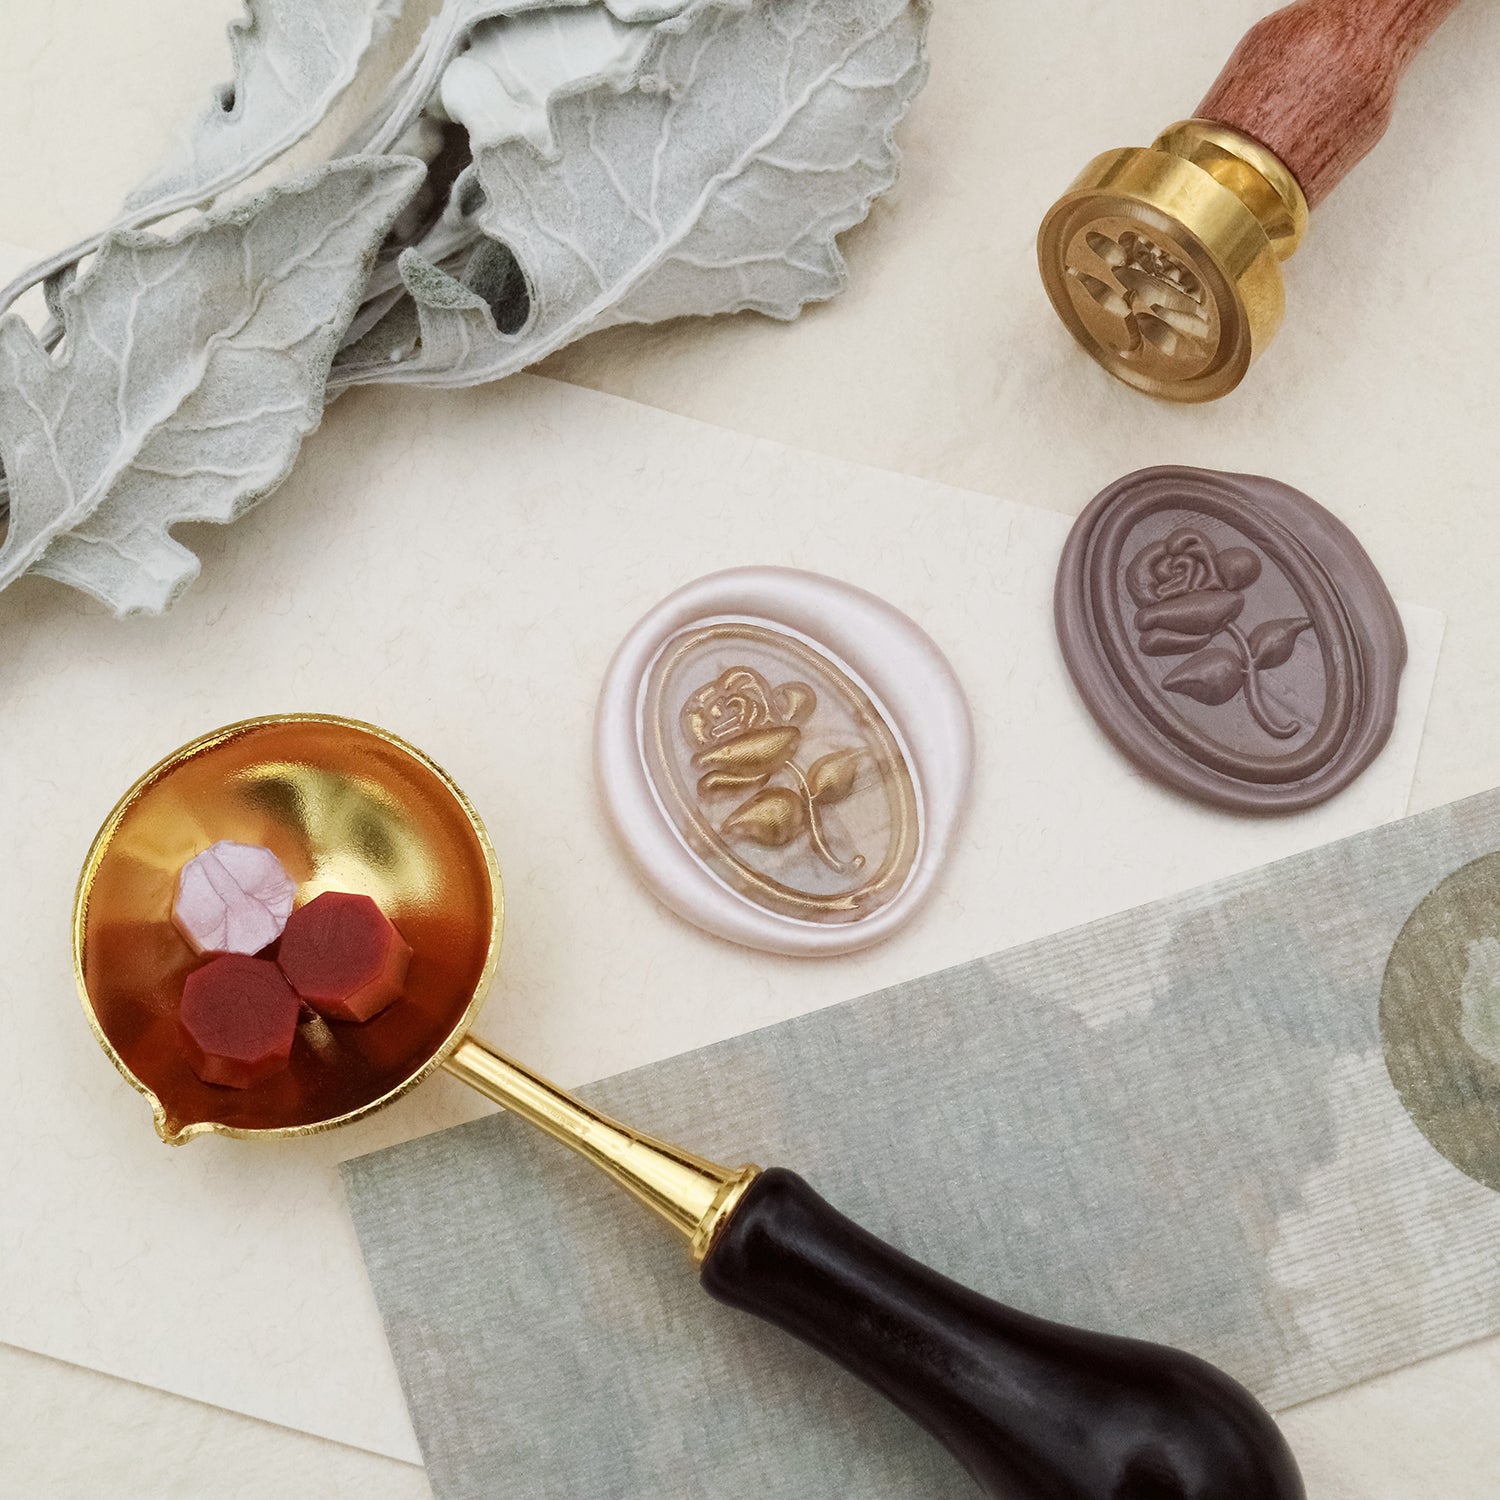 Rose &casement Wax Seal Stamp, Wax Seal Stamp , Retro Stamps With Handle,  Wax Sealing Stamp, Casement Wax Seal Stamp,wax Seals 